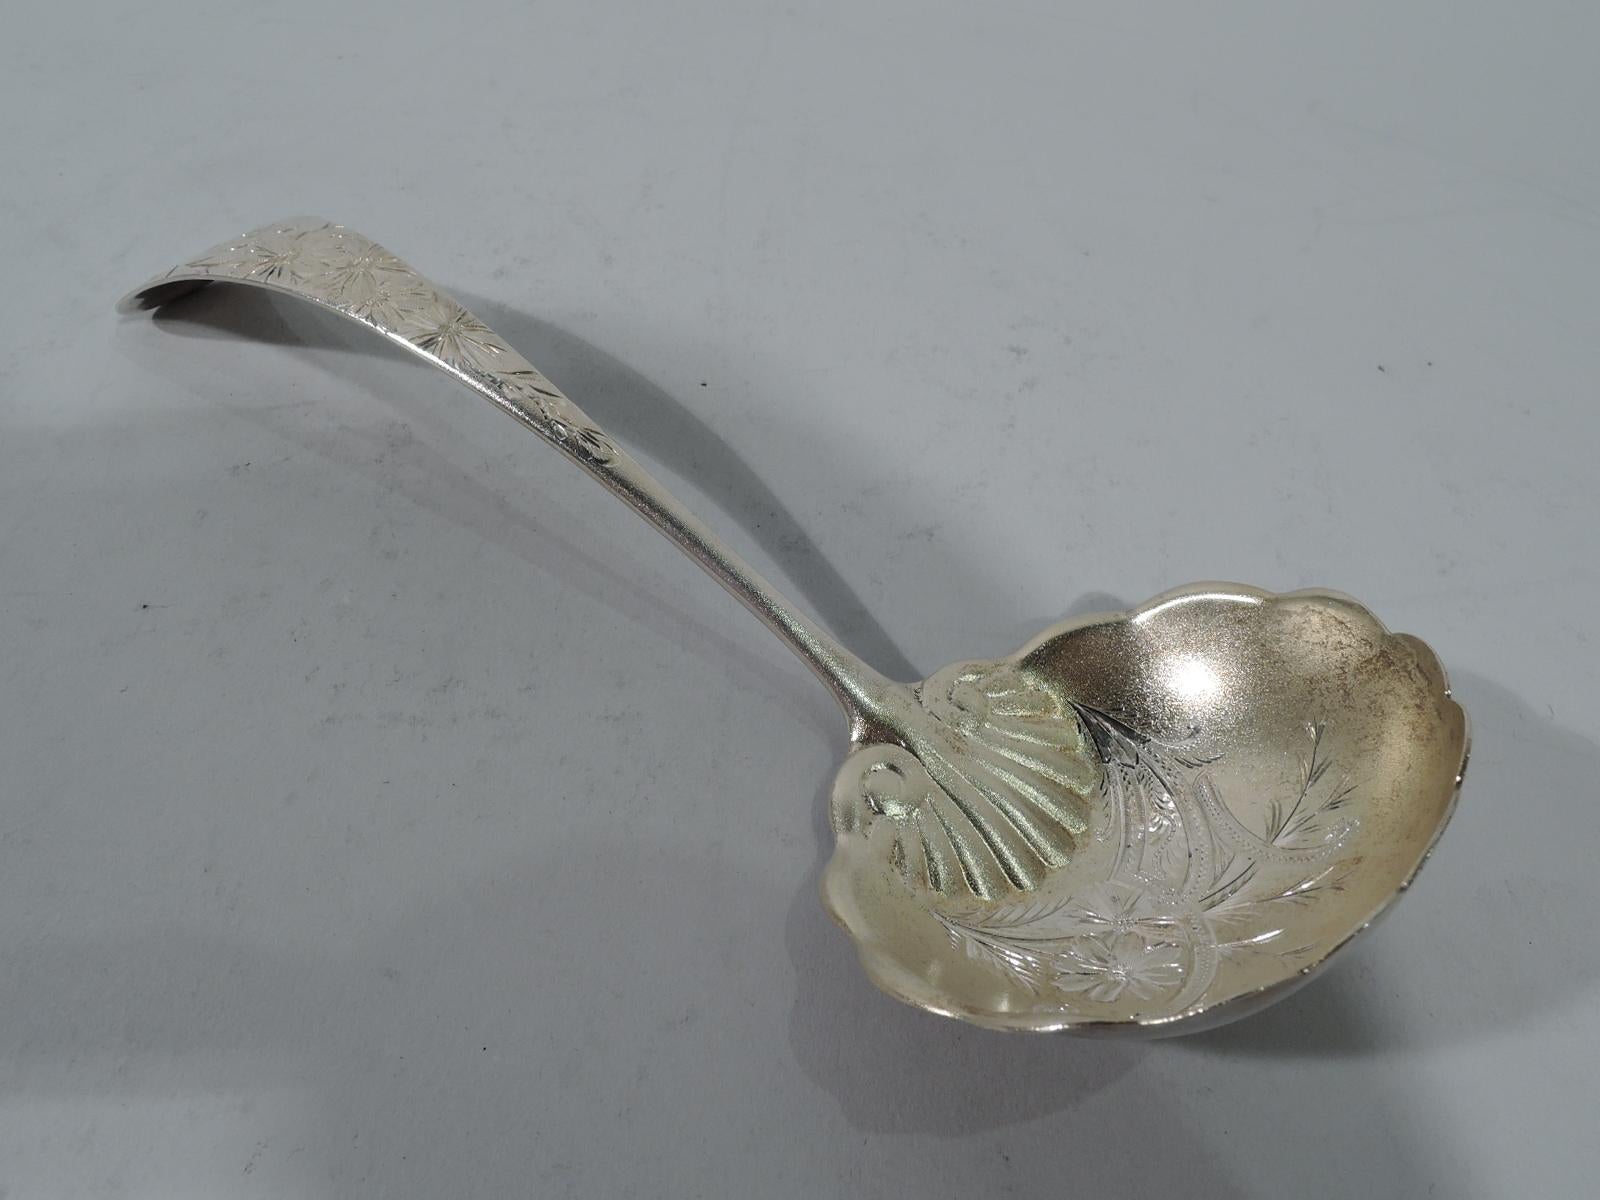 Aesthetic gilt sterling silver gravy ladle with bright-cut ornament. Made by Gorham in Providence, circa 1885. Tapering handle and scalloped bowl with chased scallop shell. Stylized flowers, foliage and scrolls. Engraved on terminal is single letter